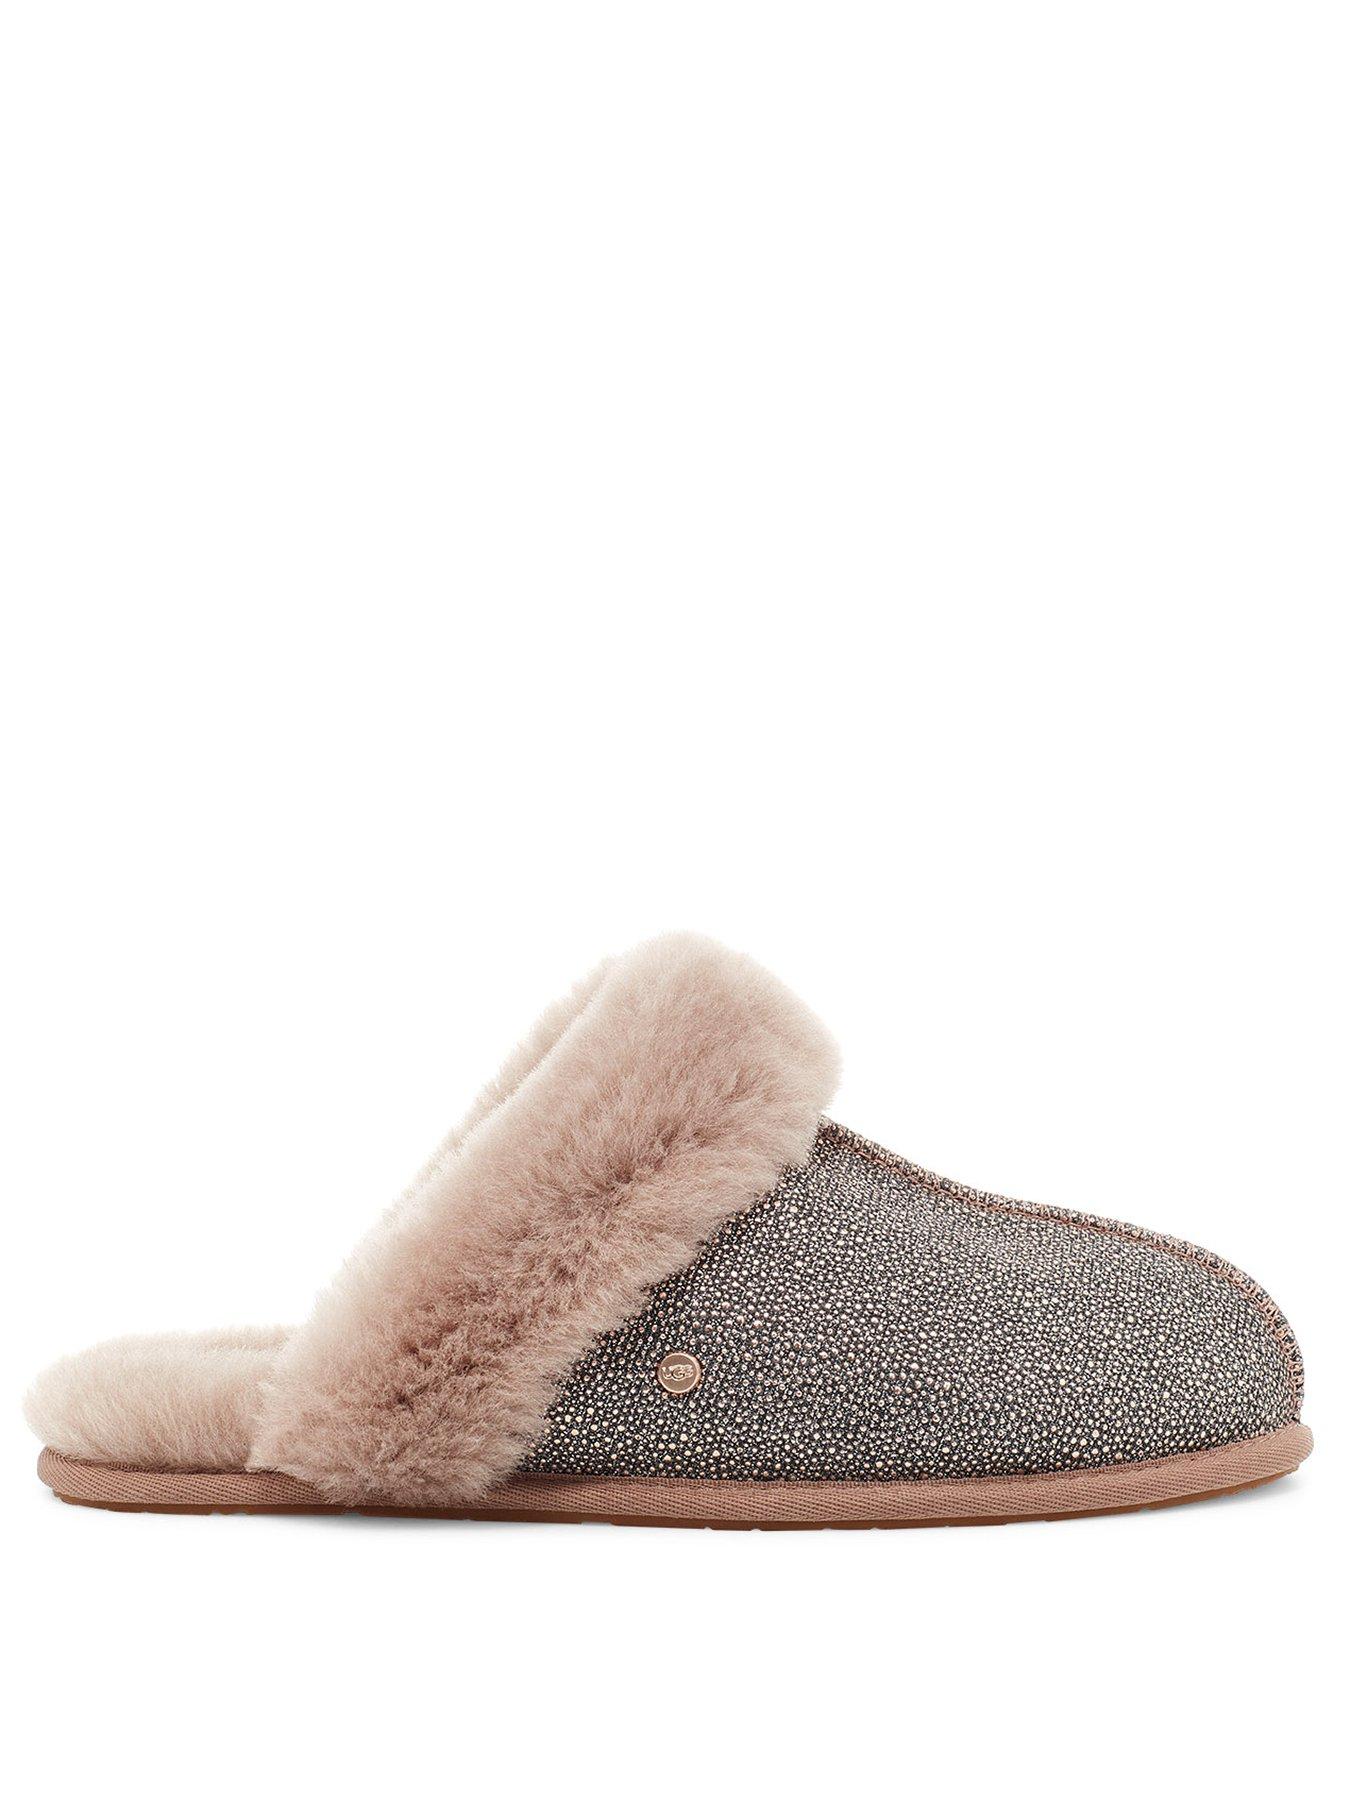 ugg scuffette slippers taupe